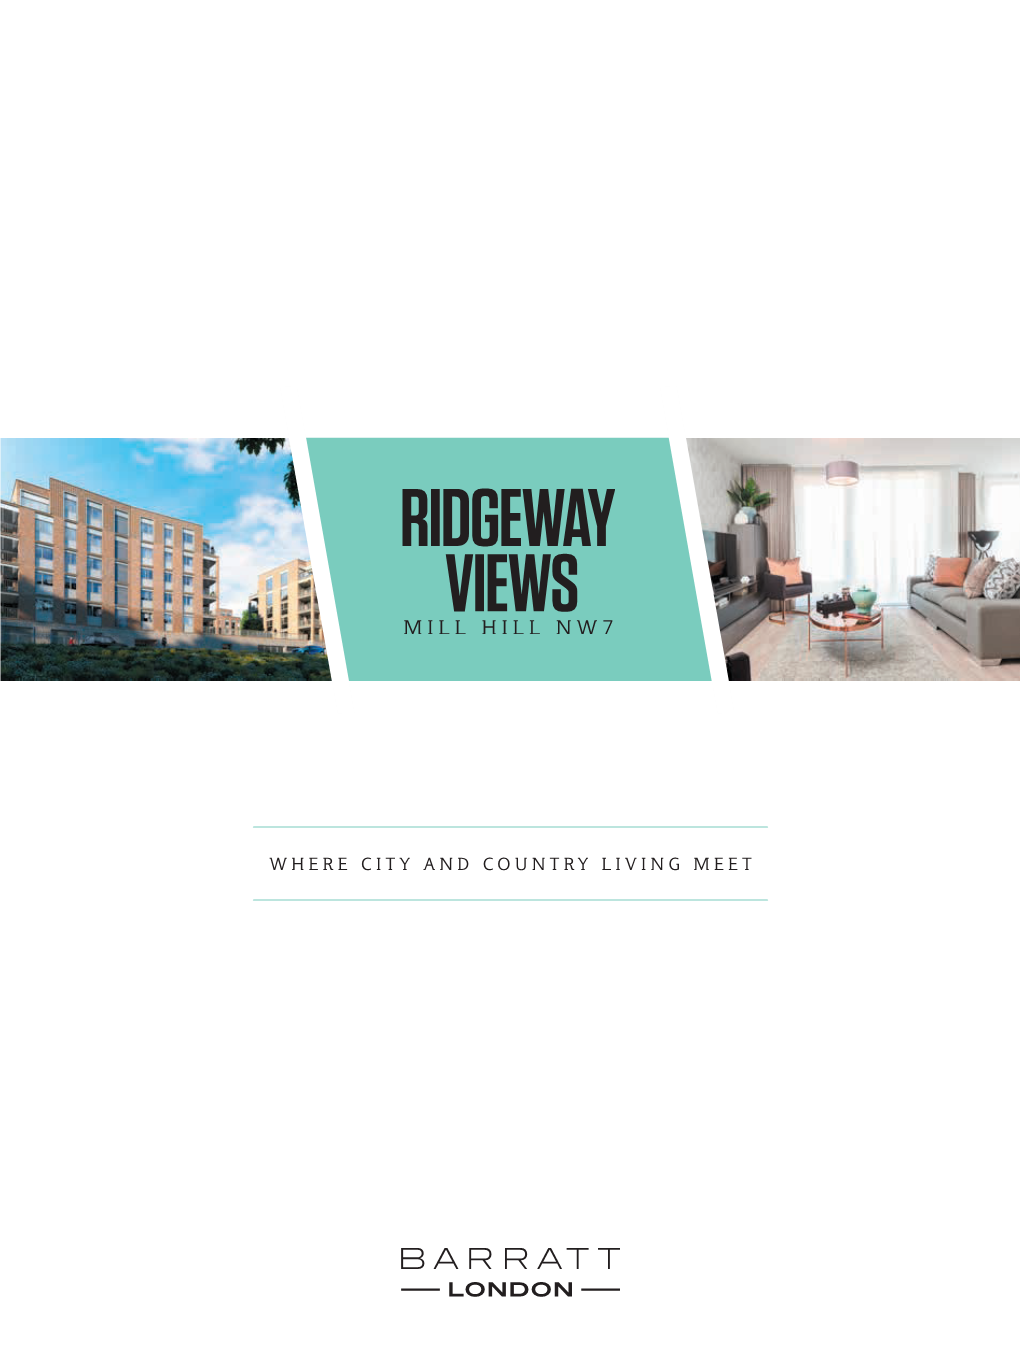 Where City and Country Living Meet Welcome to Ridgeway Views